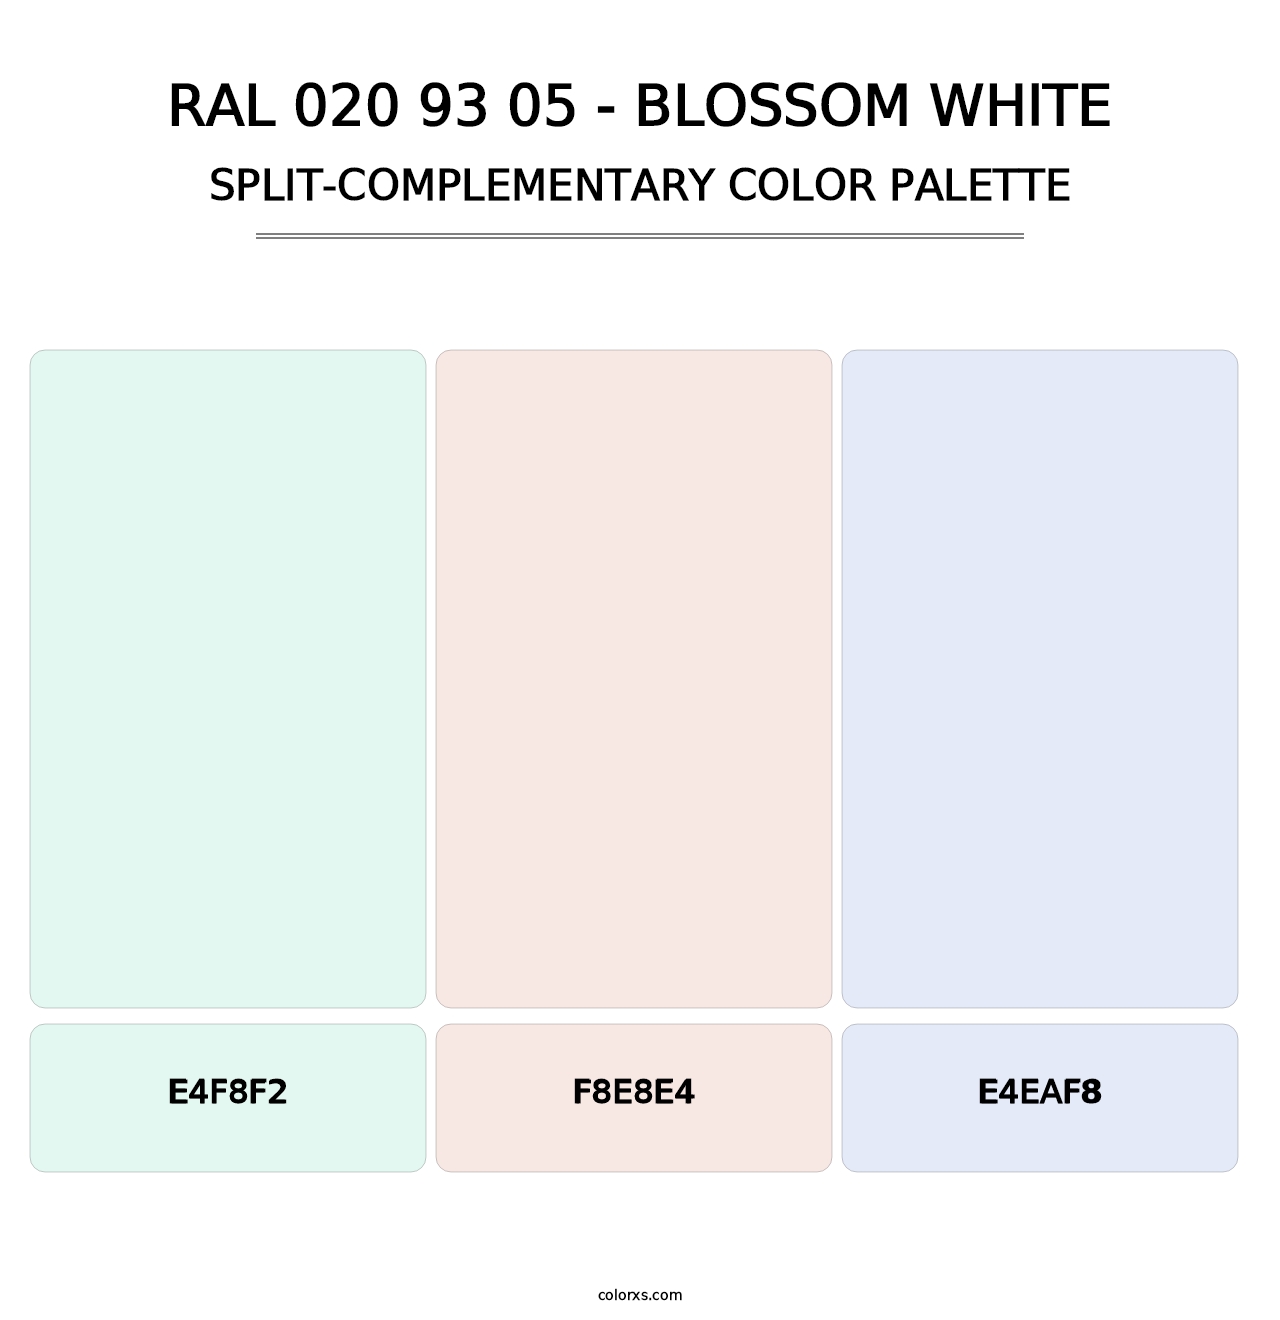 RAL 020 93 05 - Blossom White - Split-Complementary Color Palette